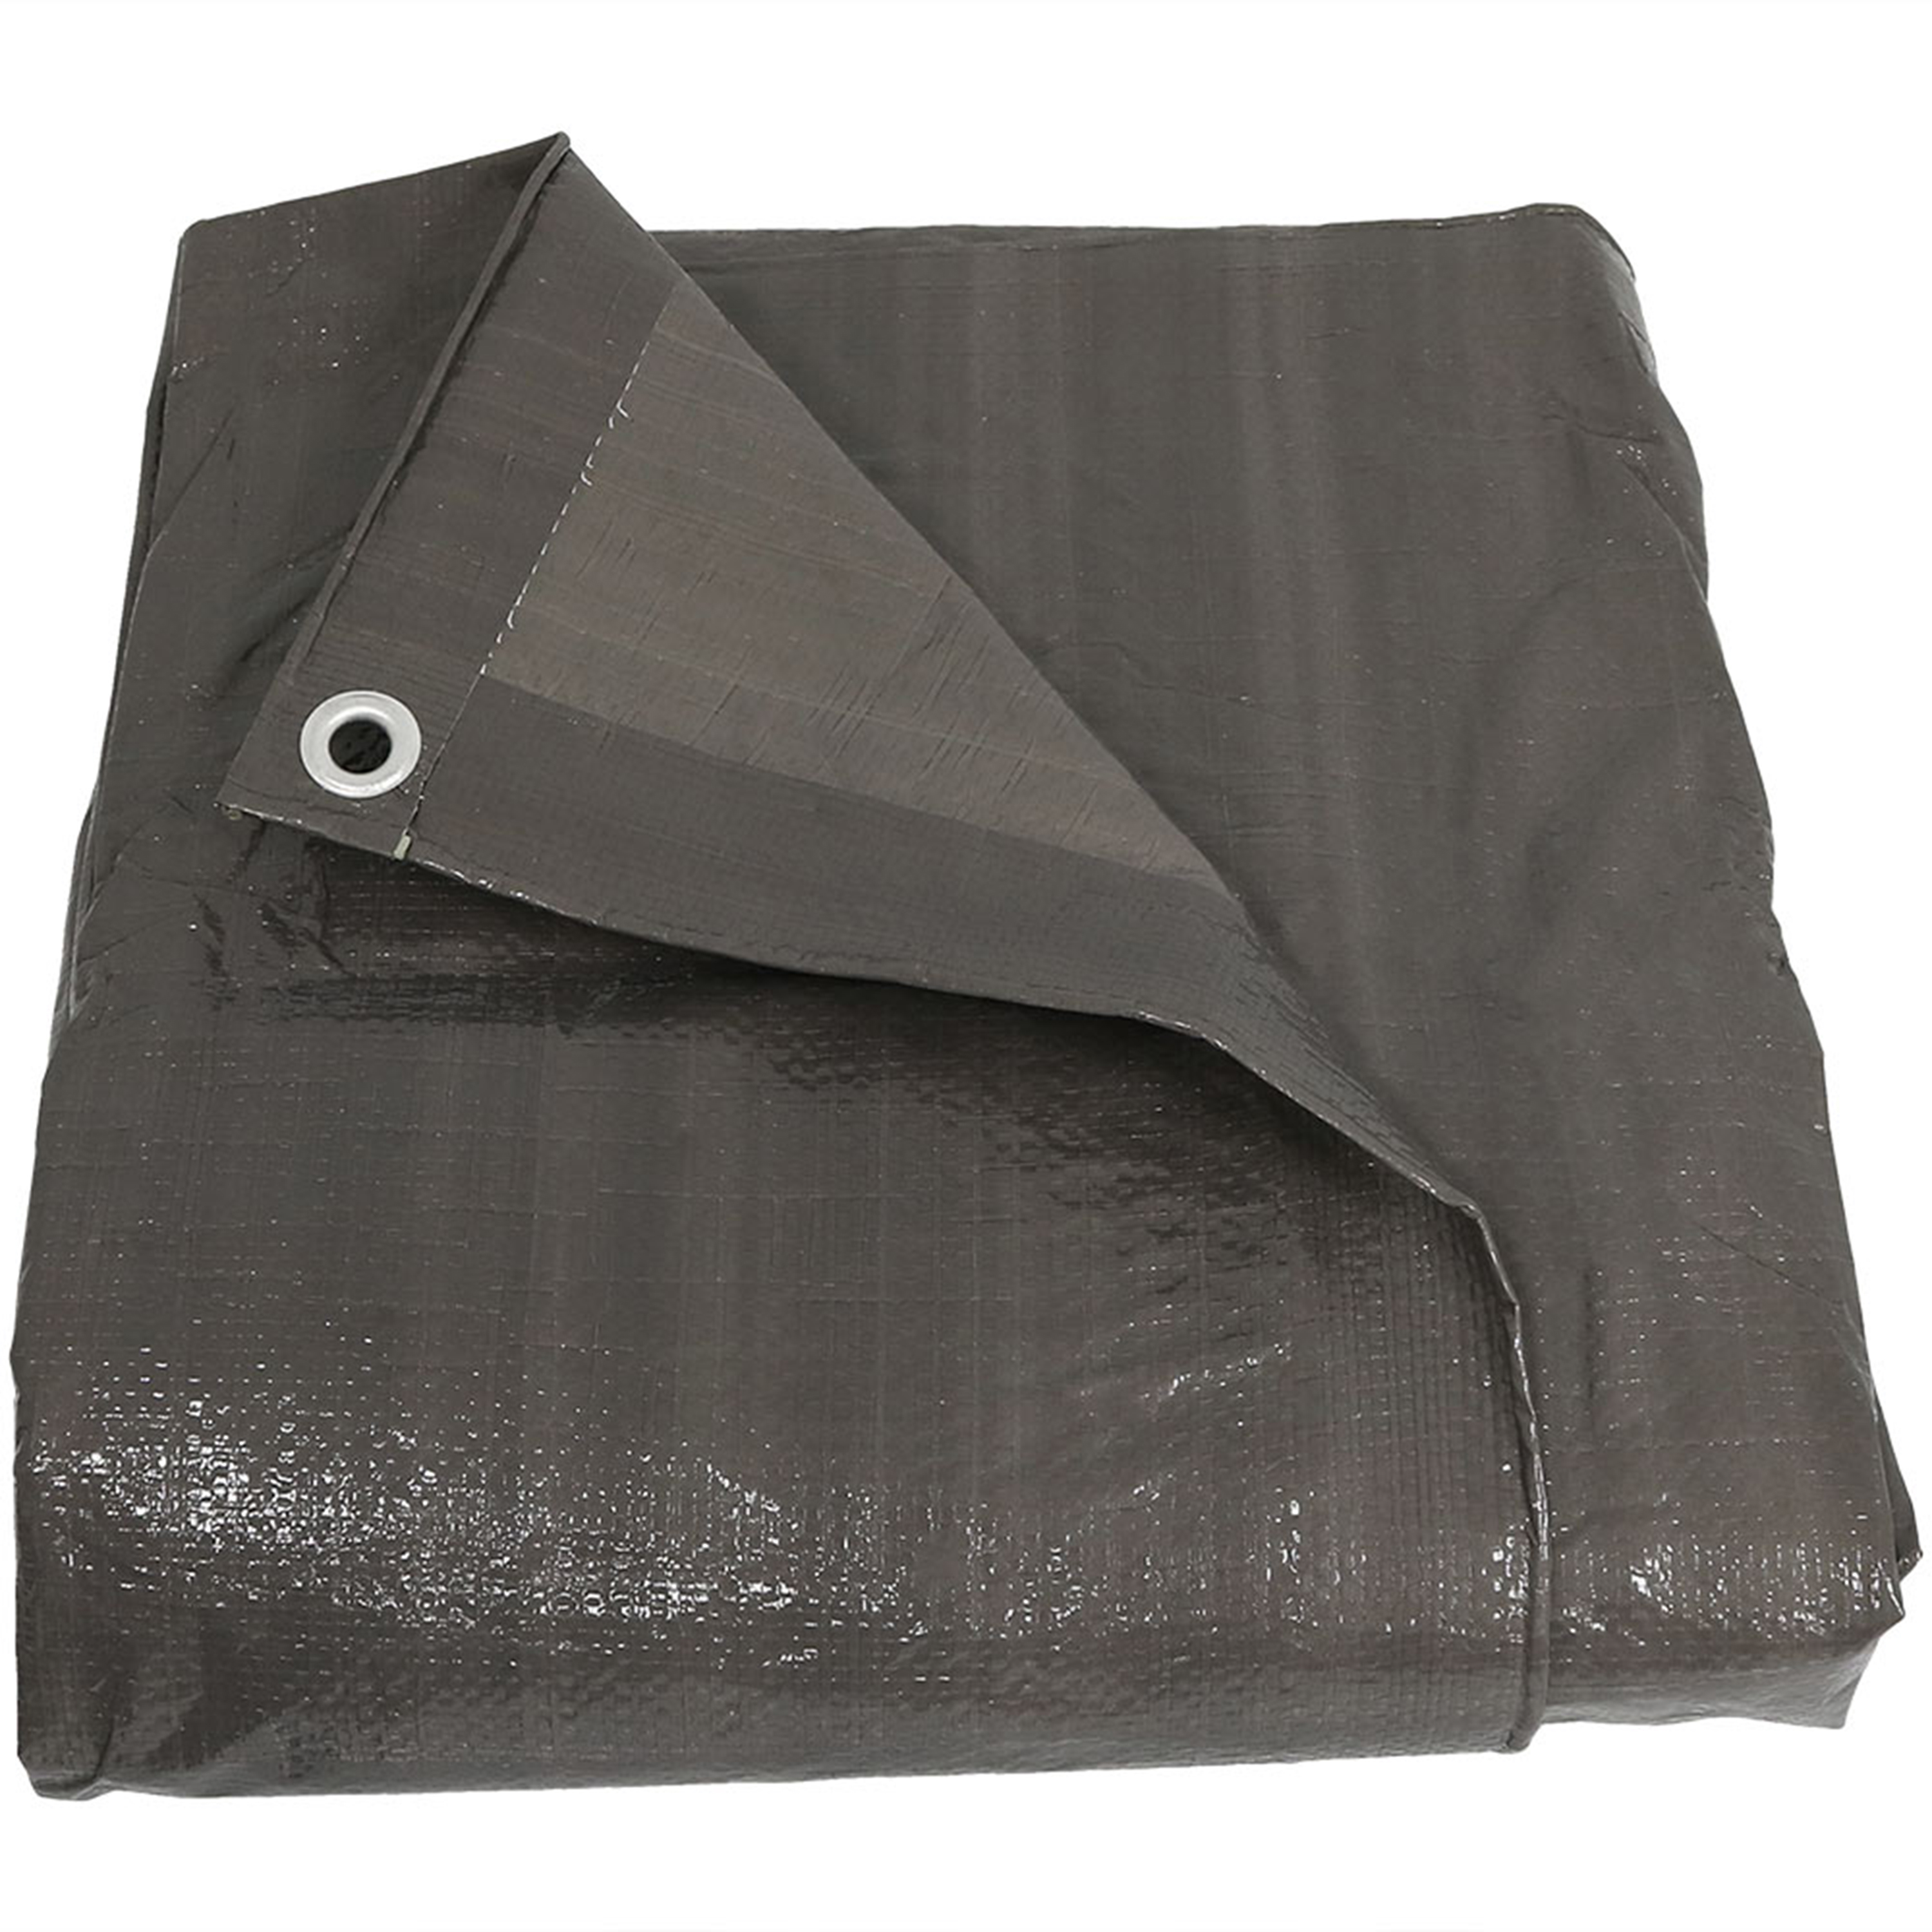 Sunnydaze Waterproof Multi-Purpose Poly Tarp, Color and Size Options Available, Dark Grey, 8-feet x 10-feet